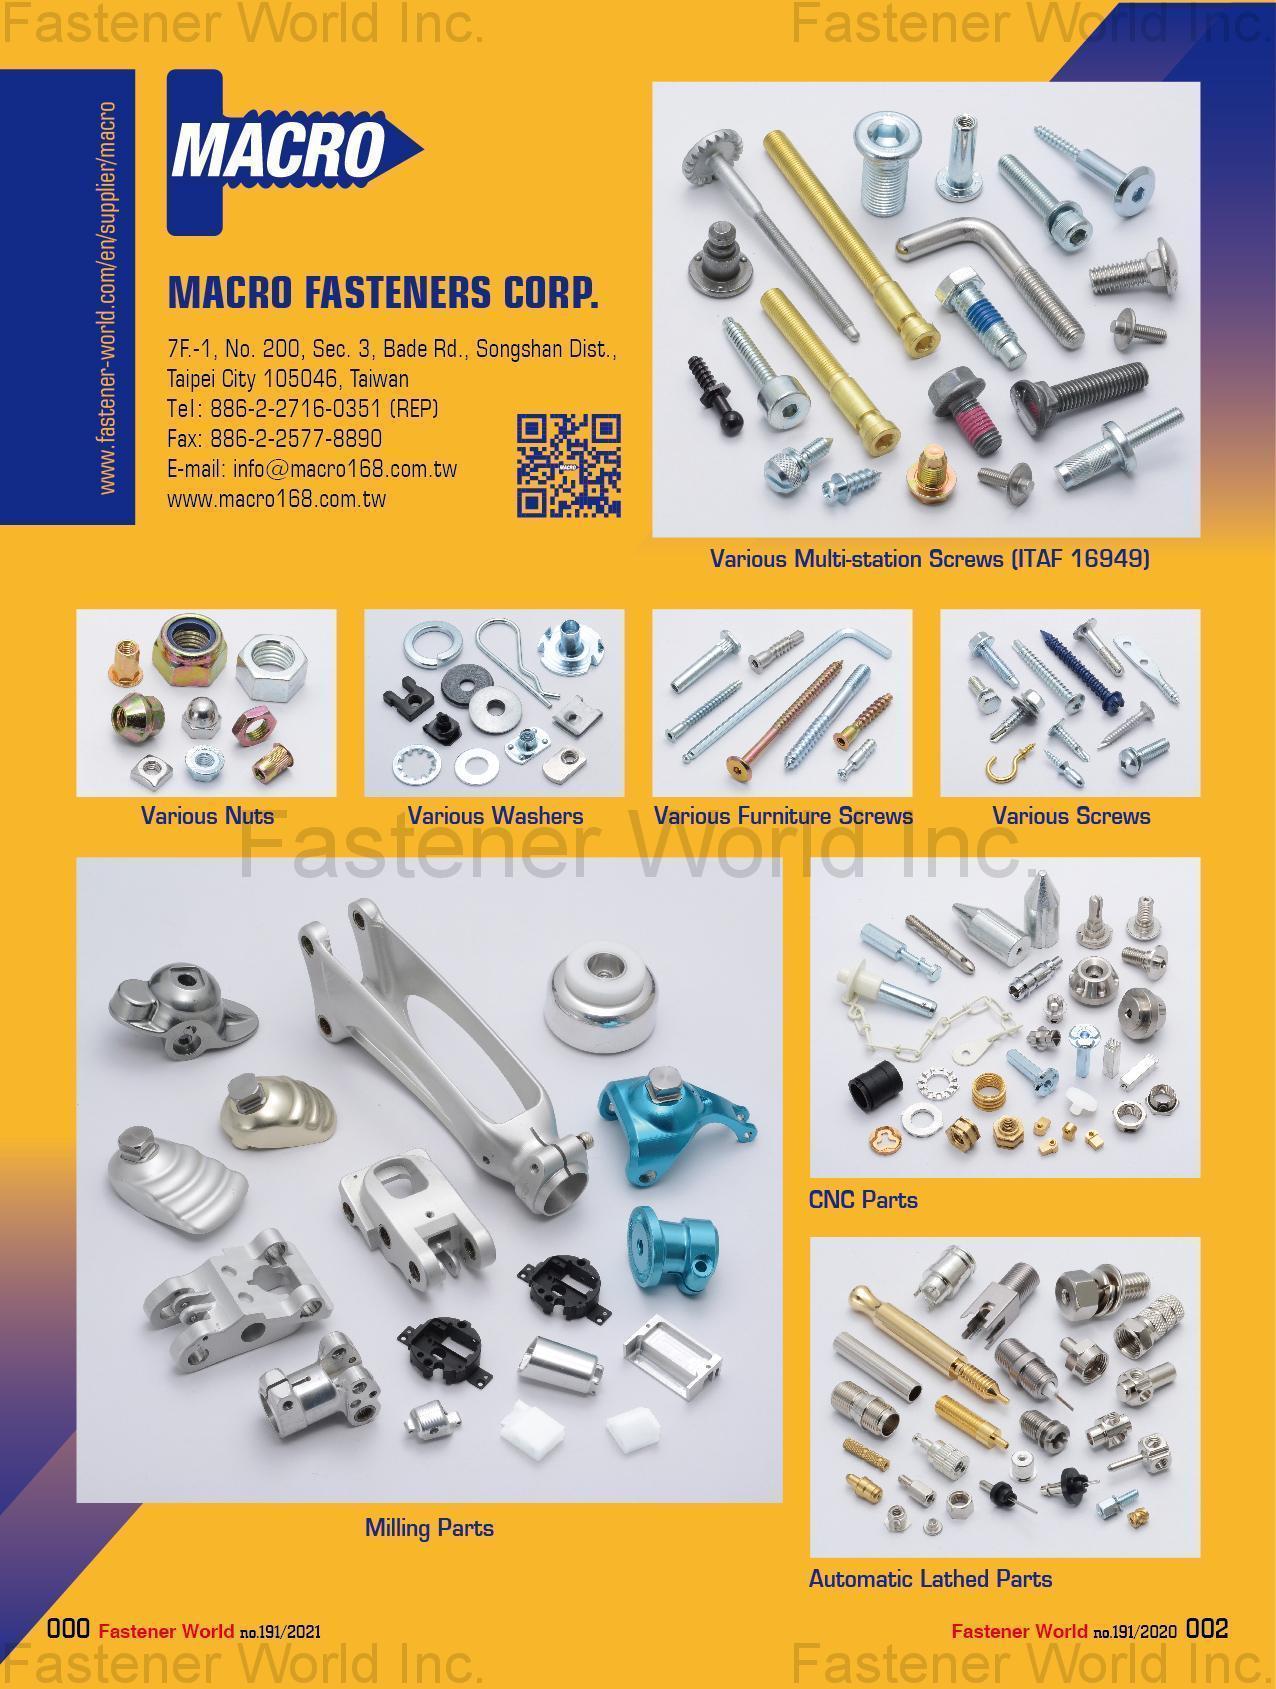 MACRO FASTENERS CORP. , Various Multi-station Screws, Various Nuts, Various Washers, Various Furniture Screws, Various Screws, CNC Parts, Milling Parts, Automatic Lathed Parts